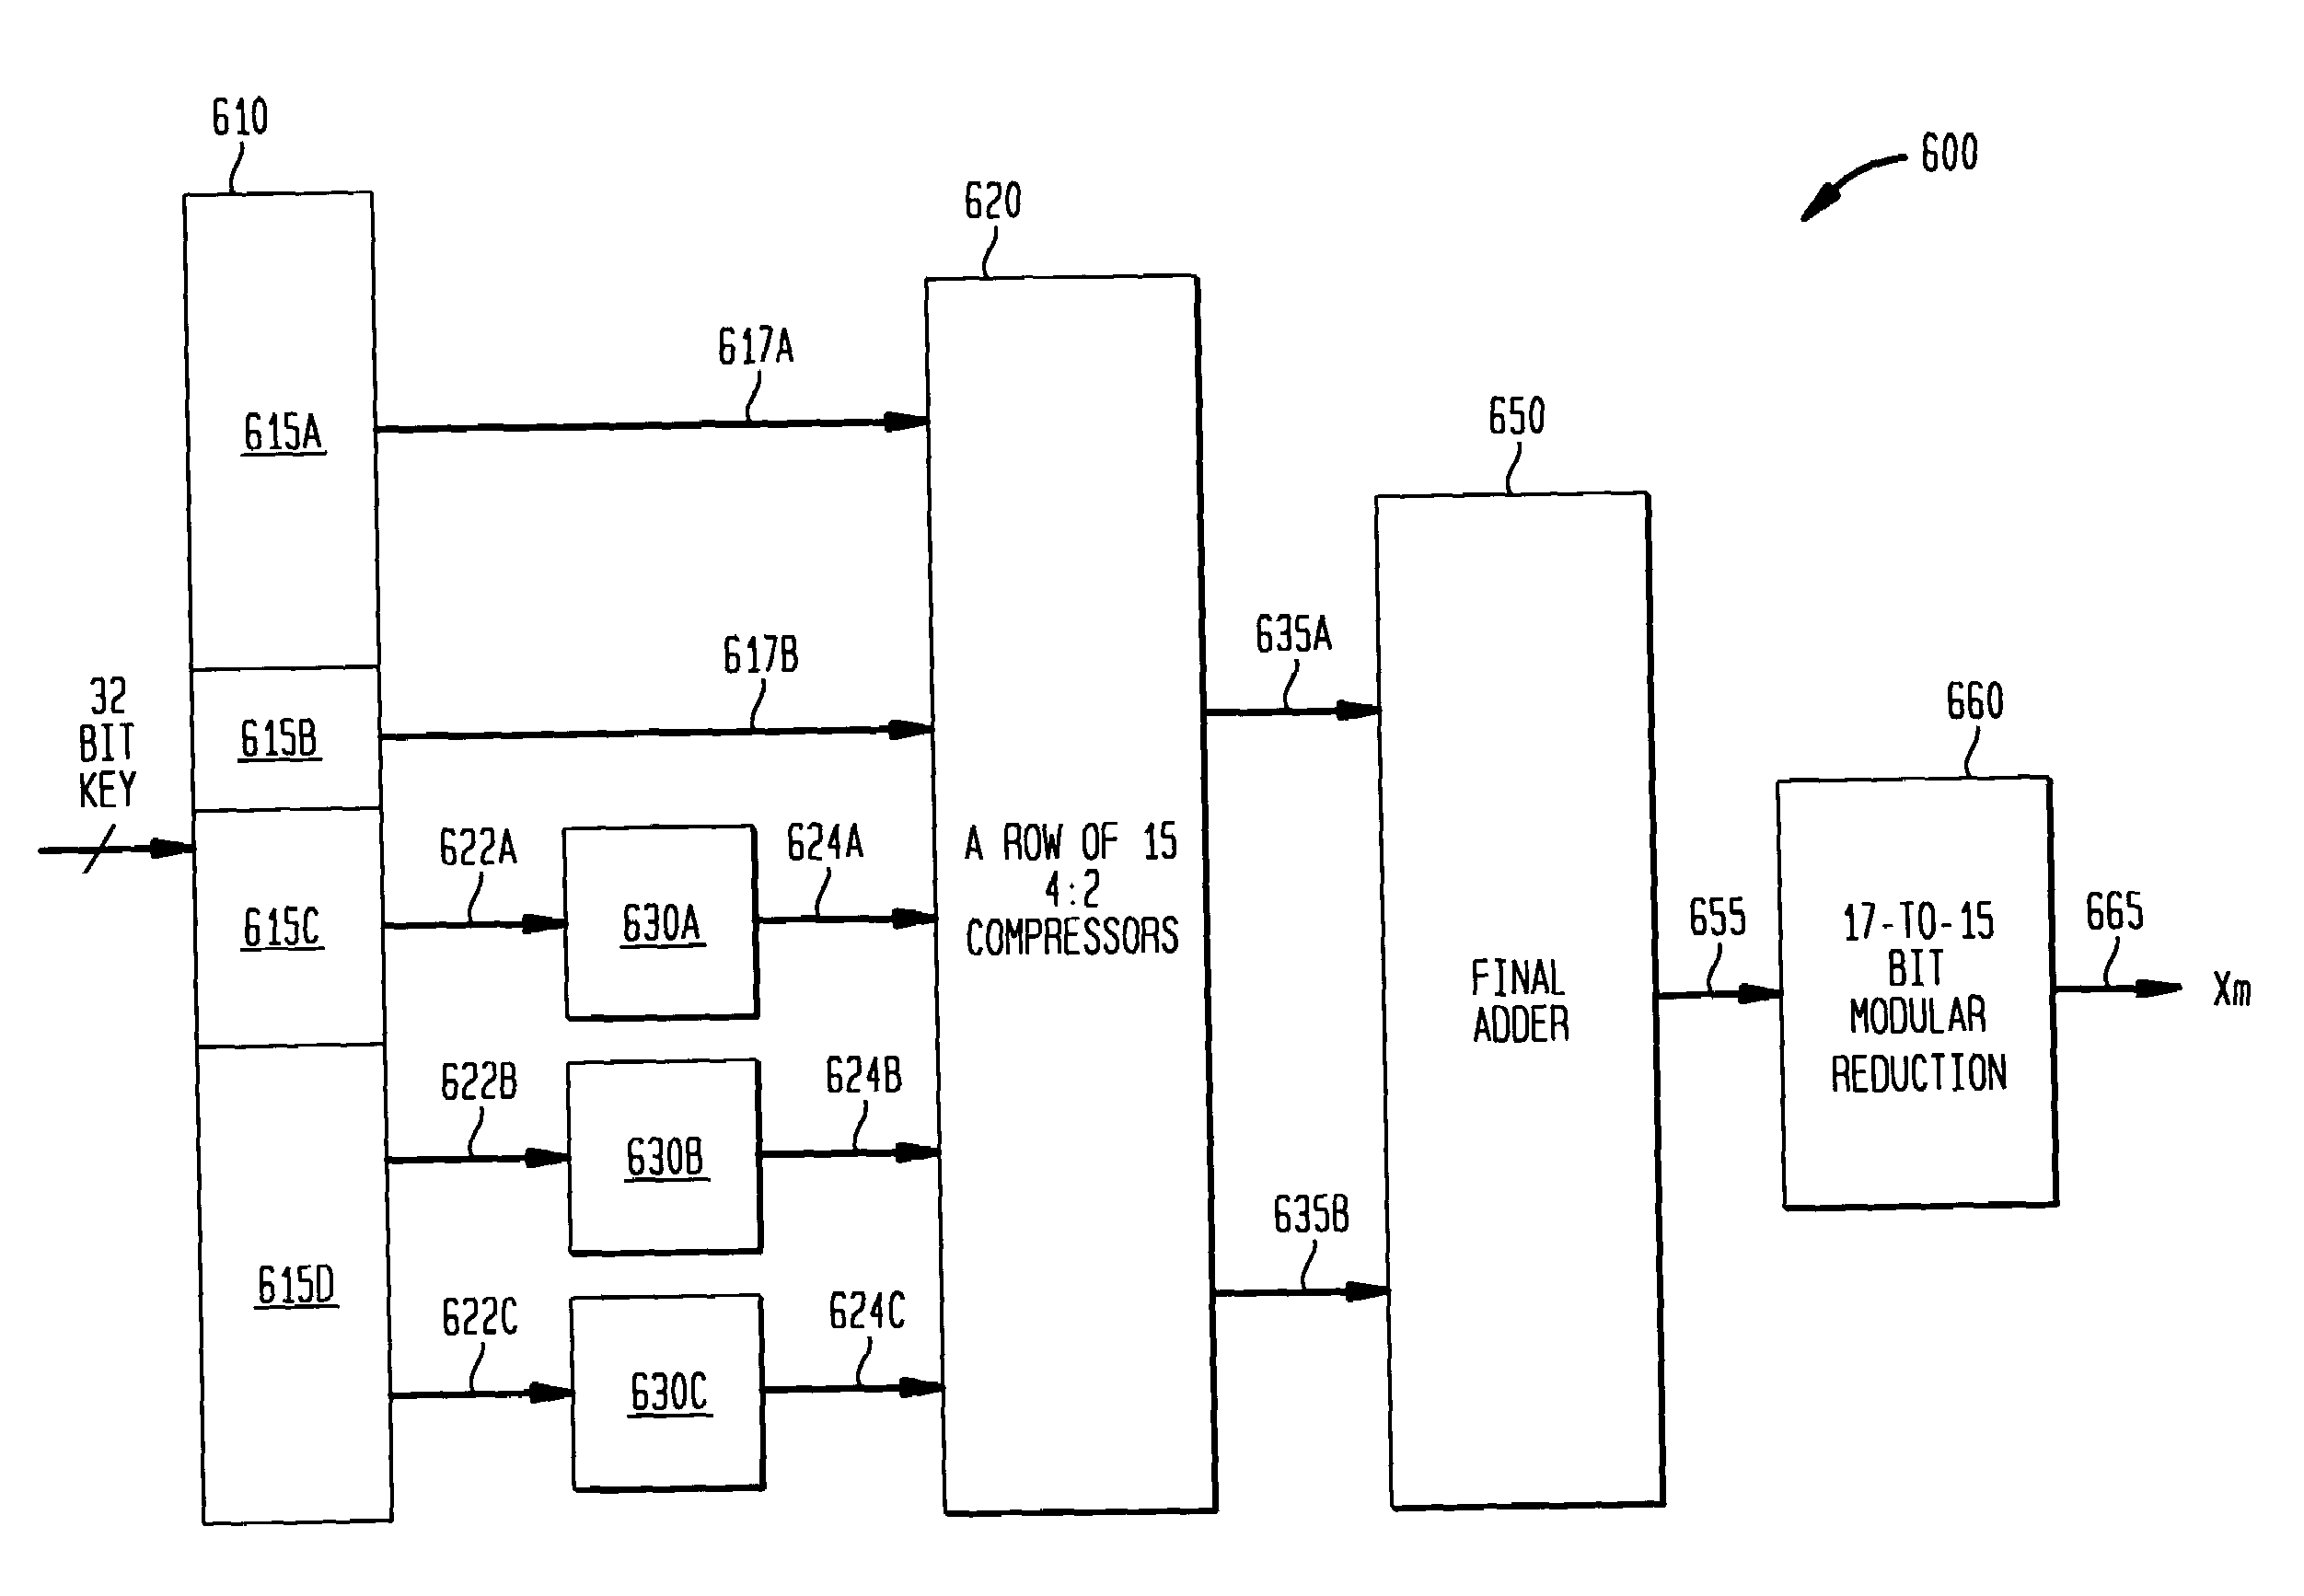 Methods and apparatus for modular reduction circuits